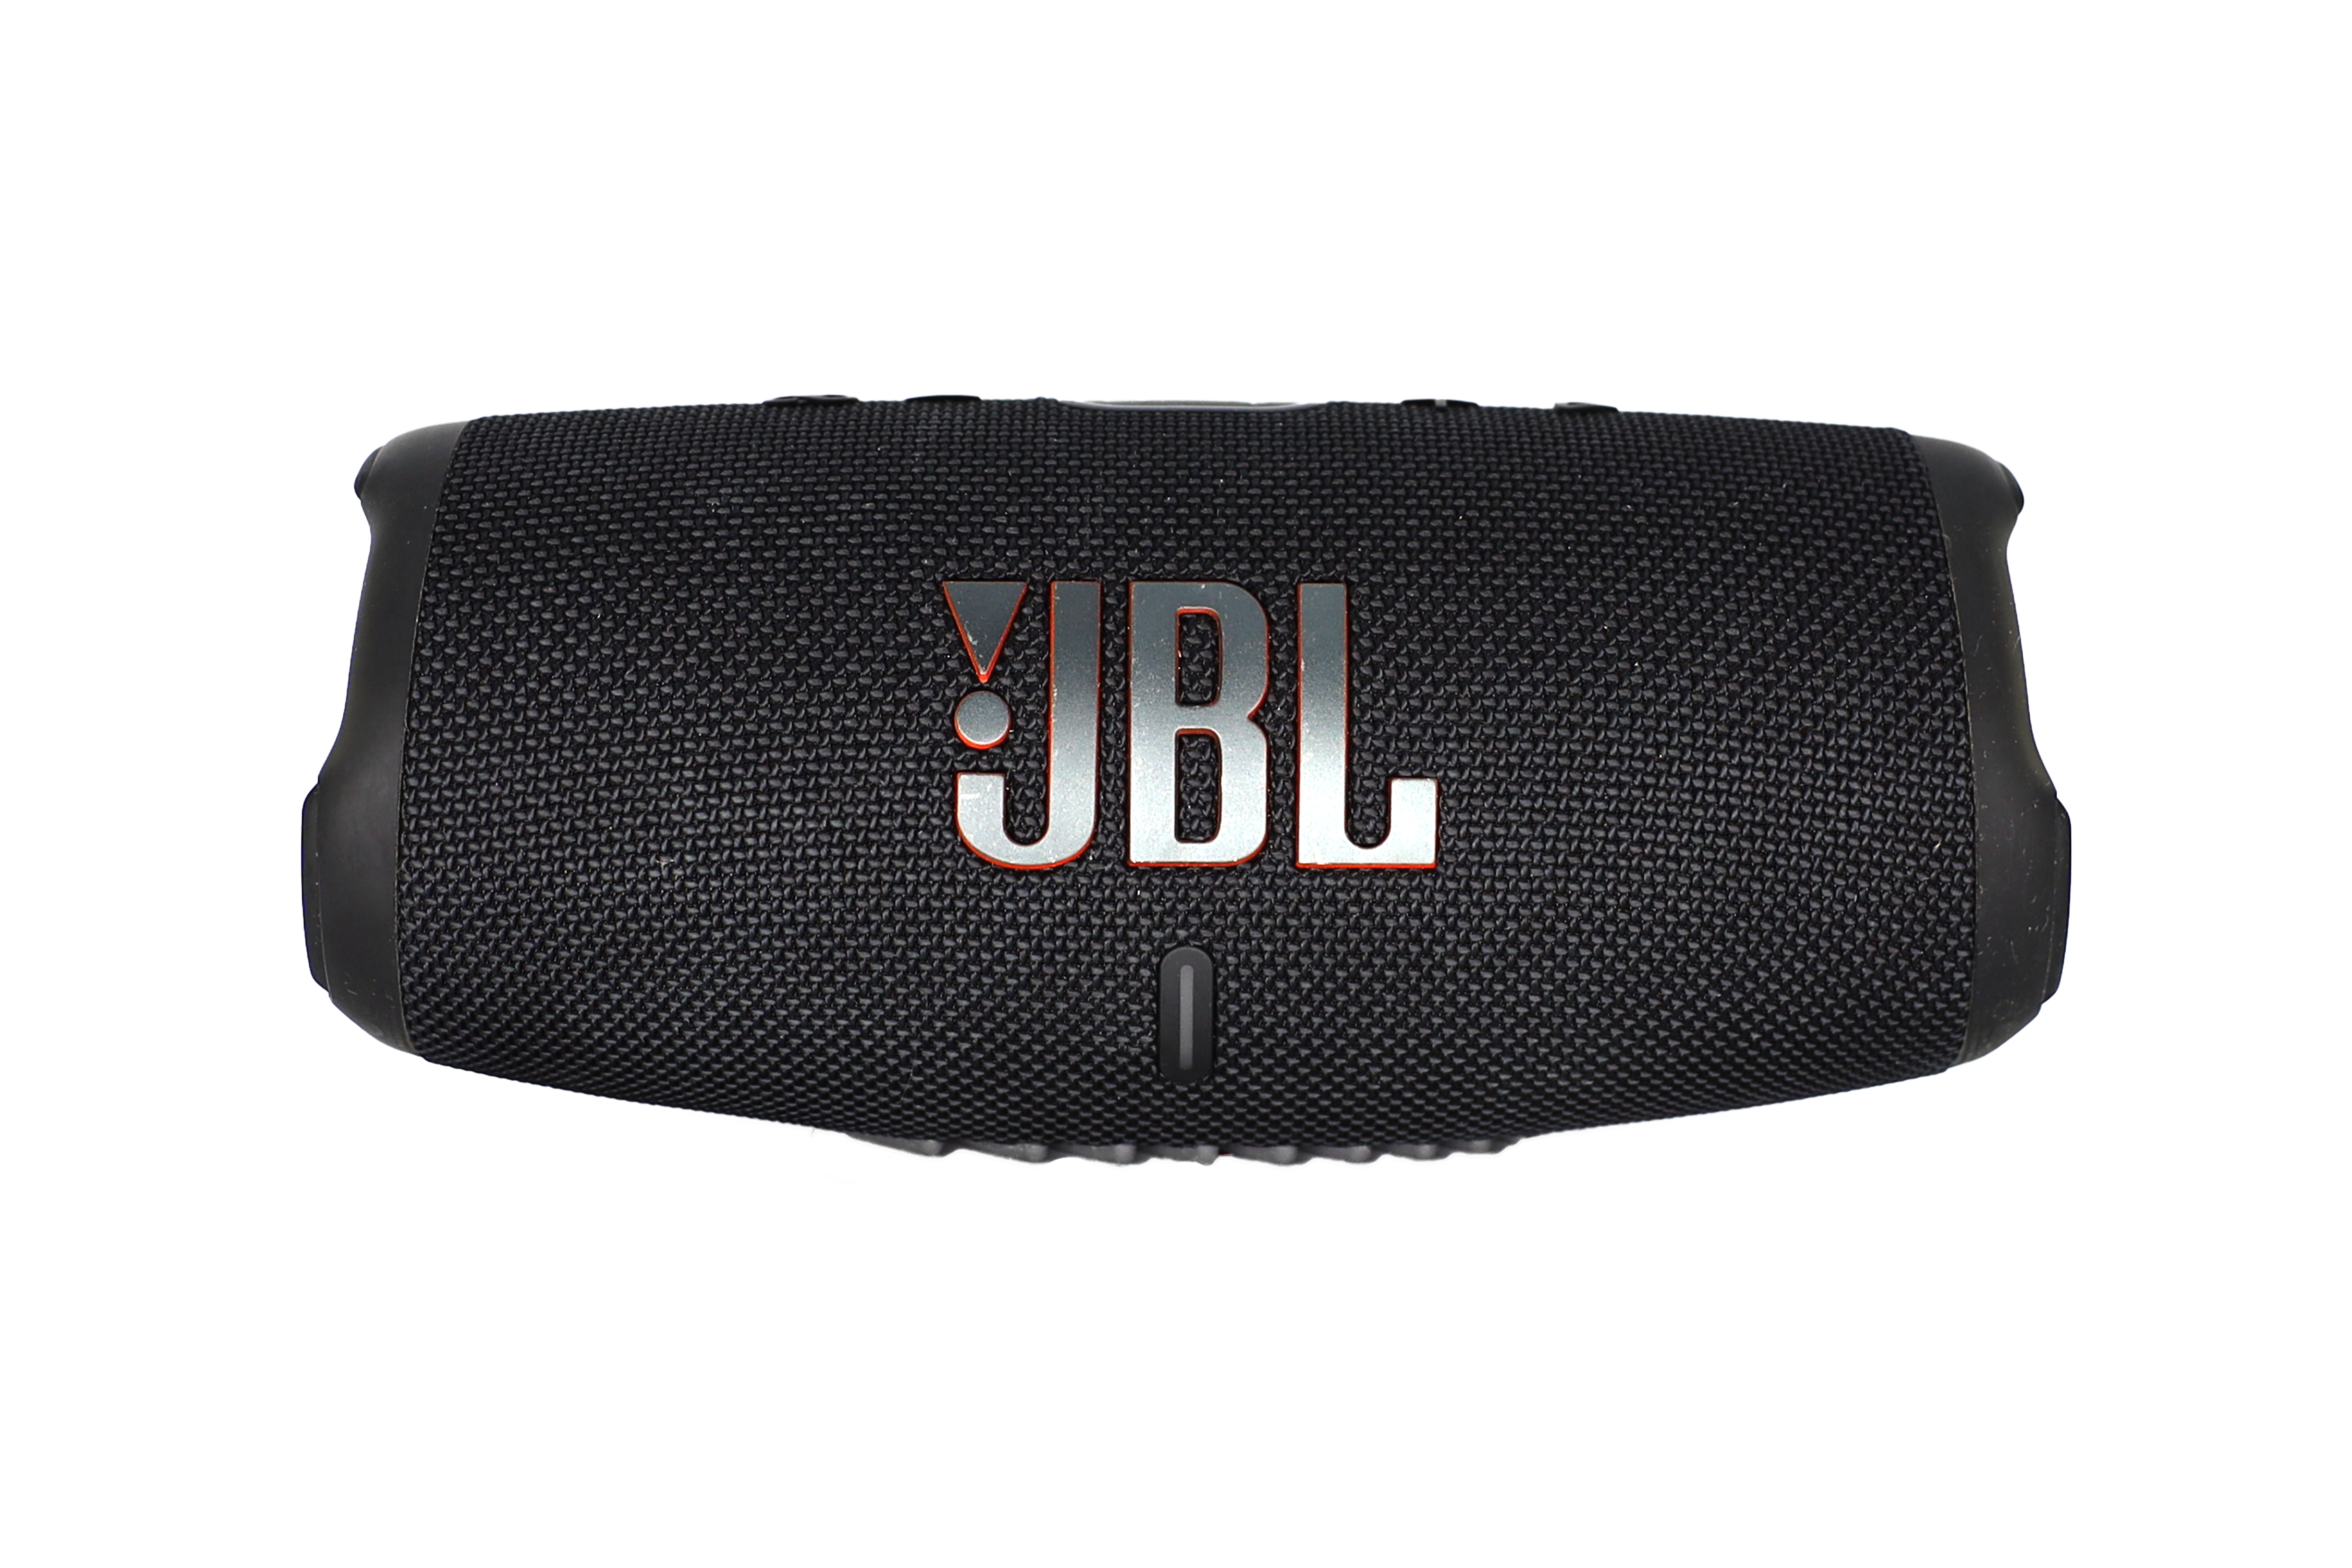 Rent JBL Charge 5 Portable Bluetooth Speaker from €10.90 per month